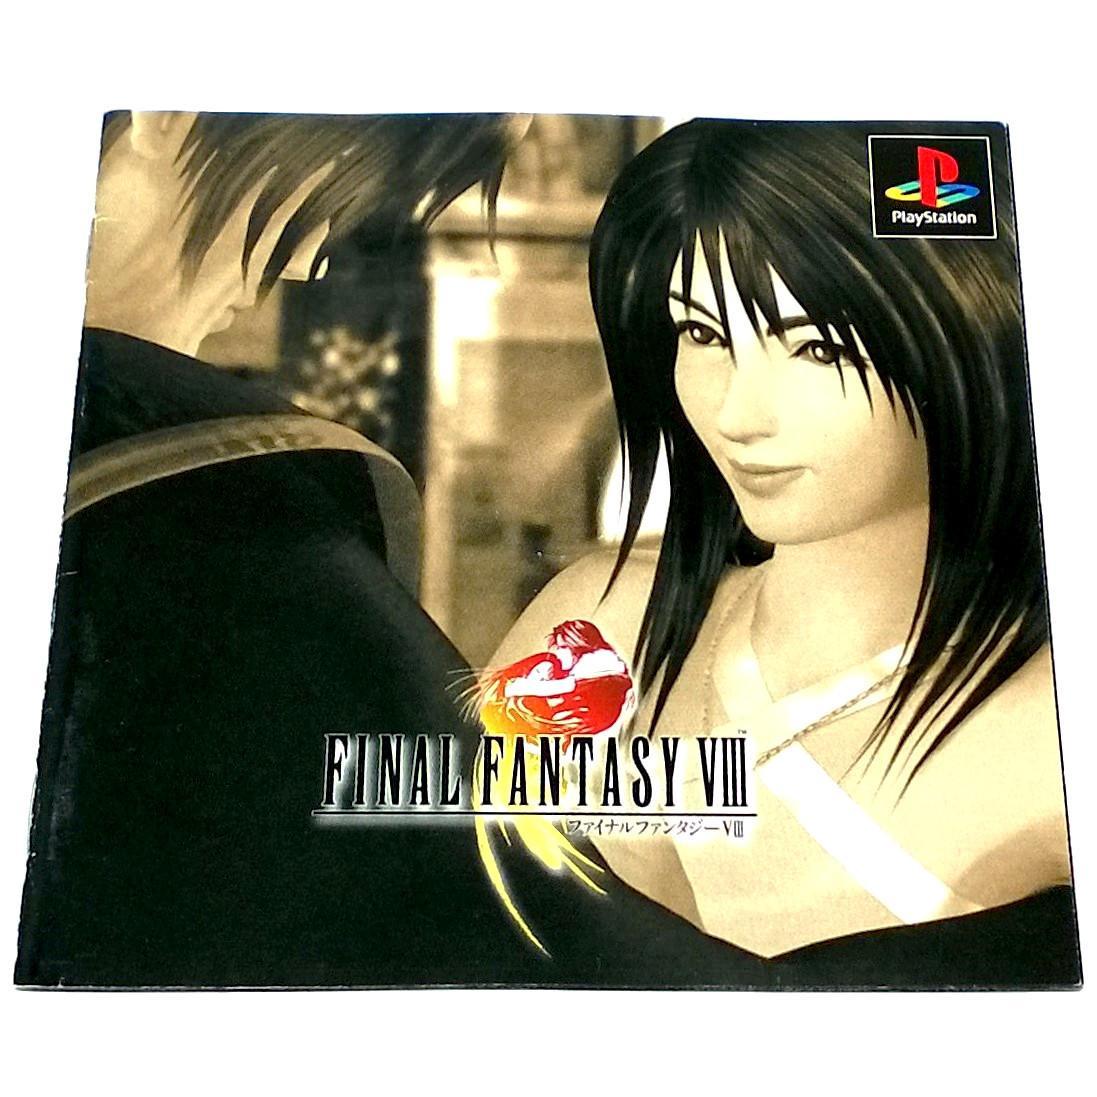 Final Fantasy VIII for PlayStation (import) - Front of manual